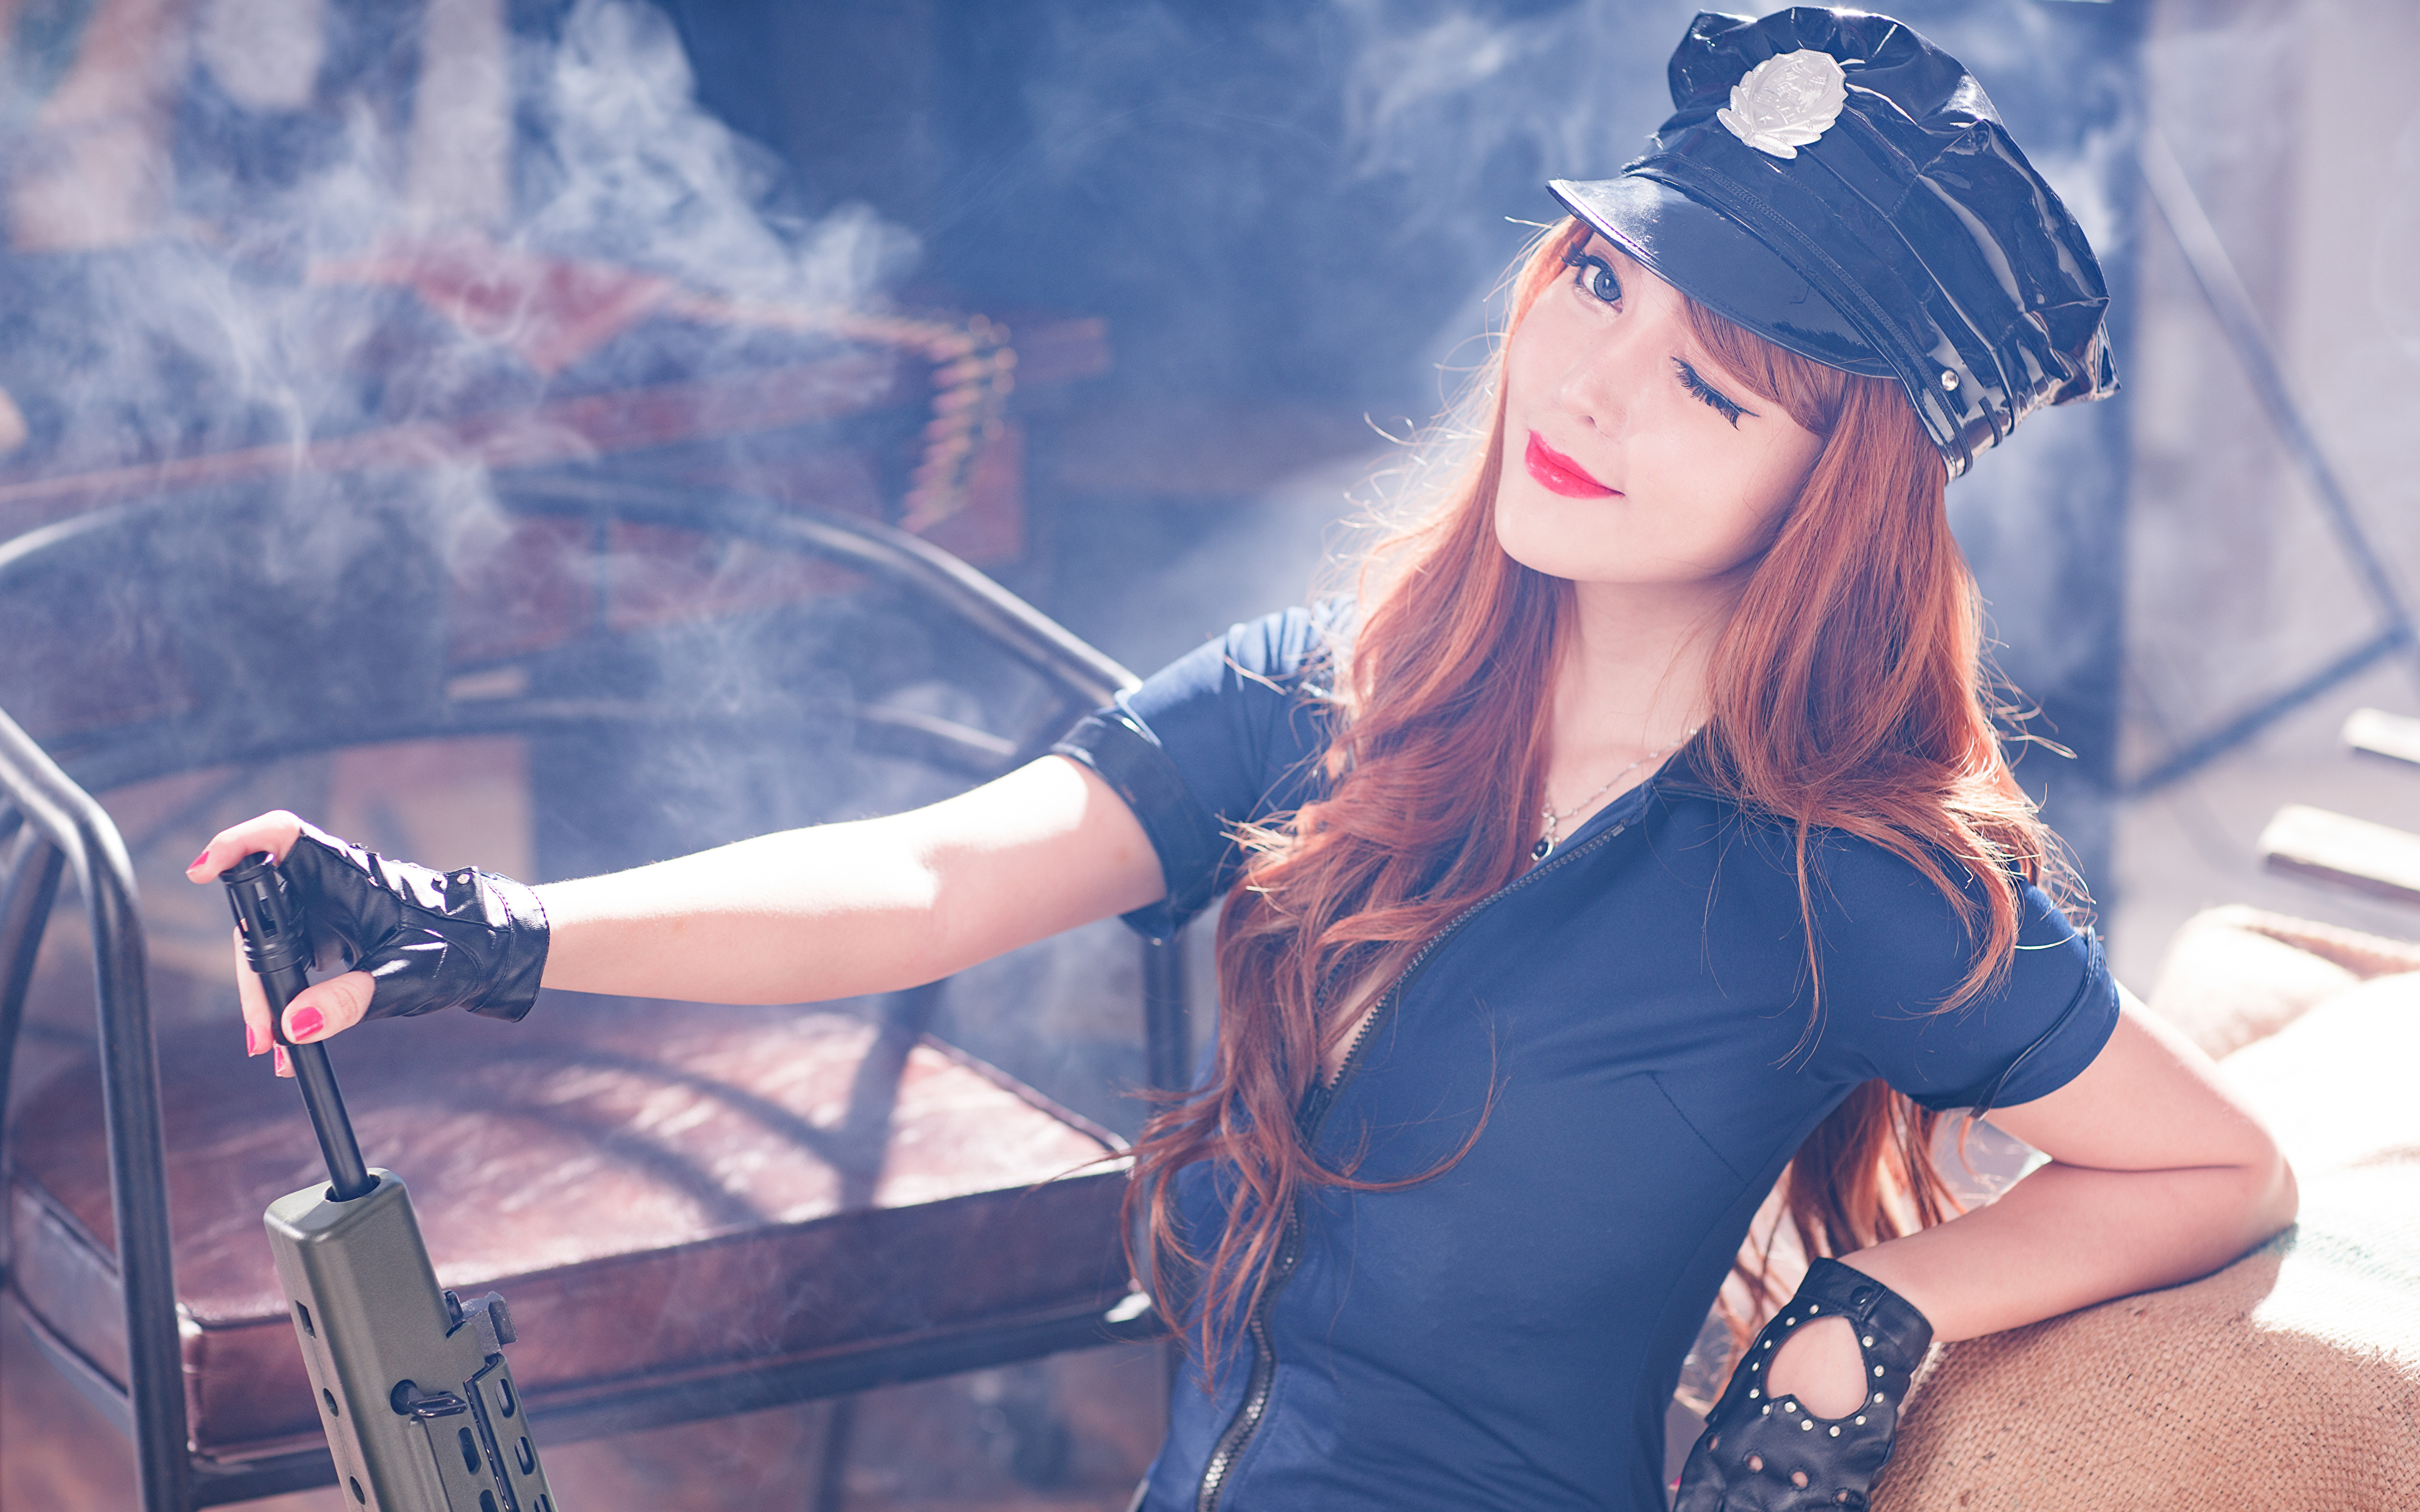 Images Brown haired Assault rifle Hat Girls Asiatic Smoke 3840x2400